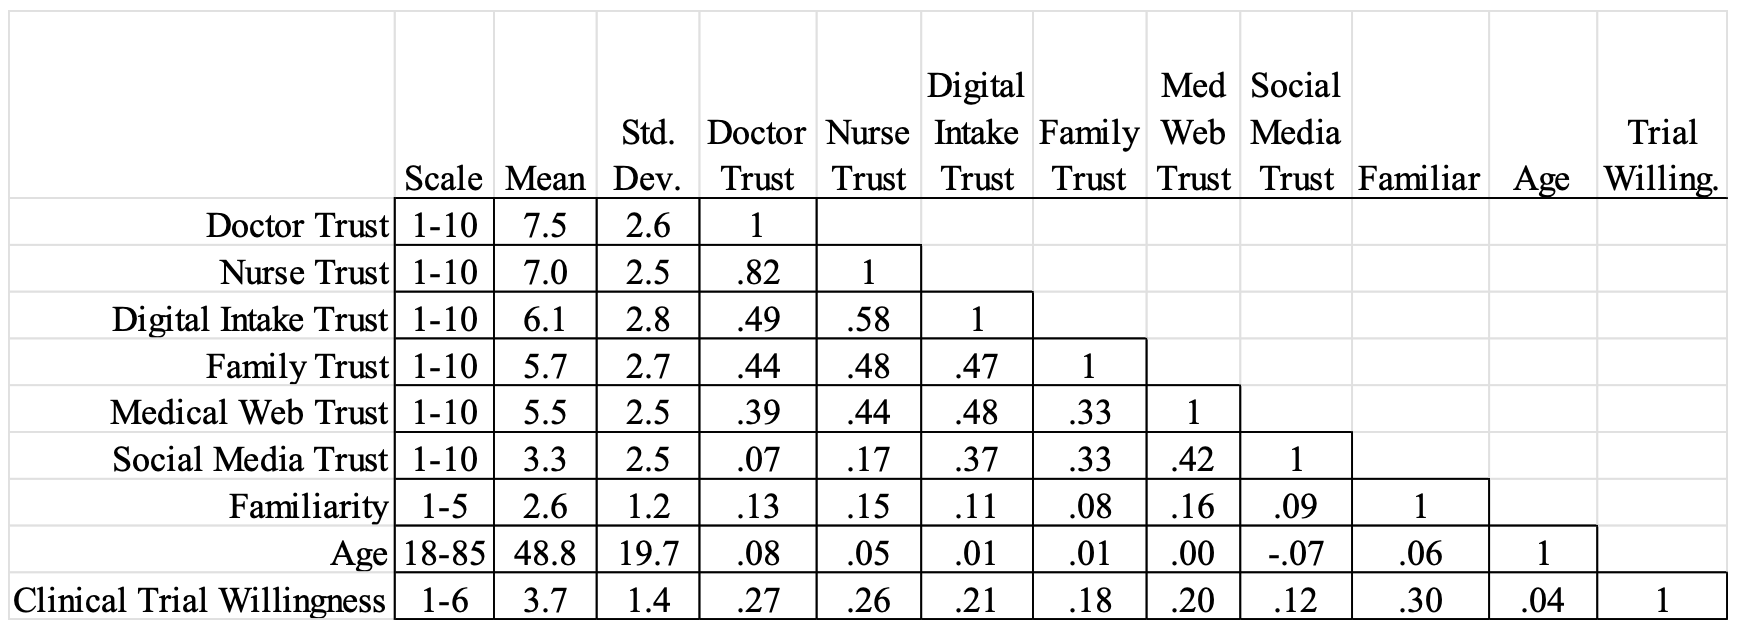 Table 1. Descriptive statistics & correlations for variables used in the models

Source: Phreesia data, July 2022